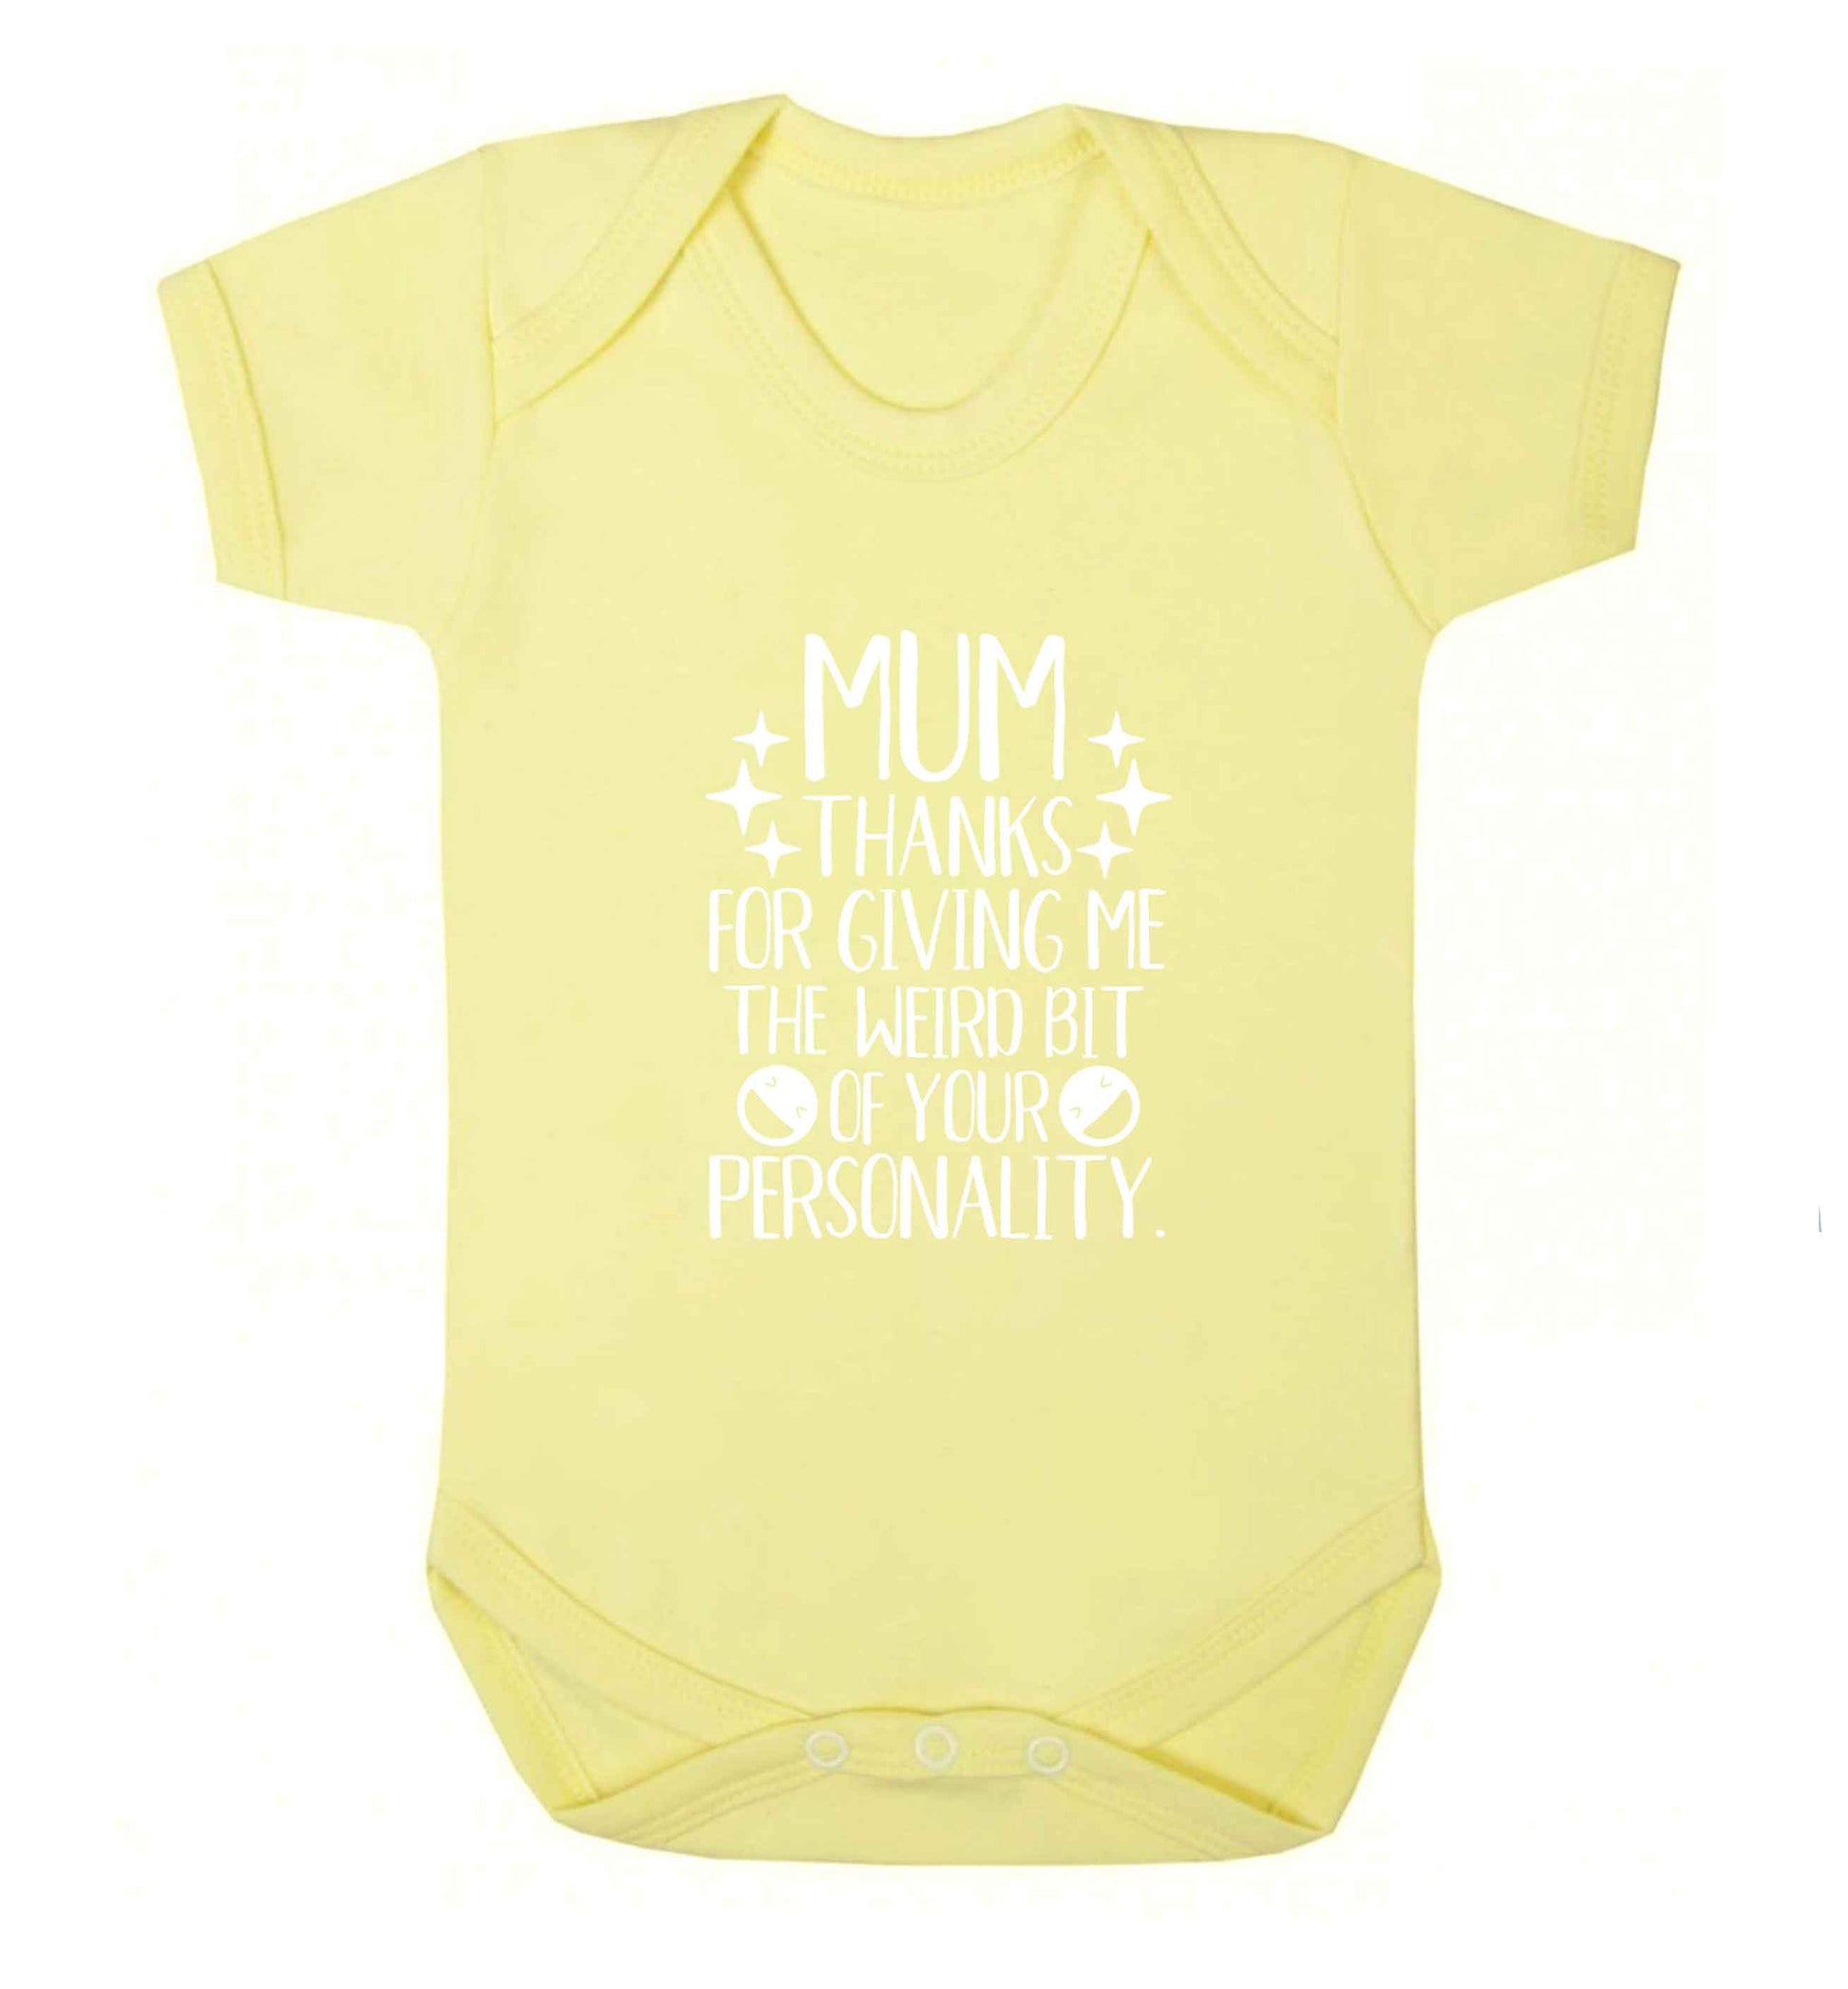 Mum thanks for giving me the weird bit of your personality baby vest pale yellow 18-24 months